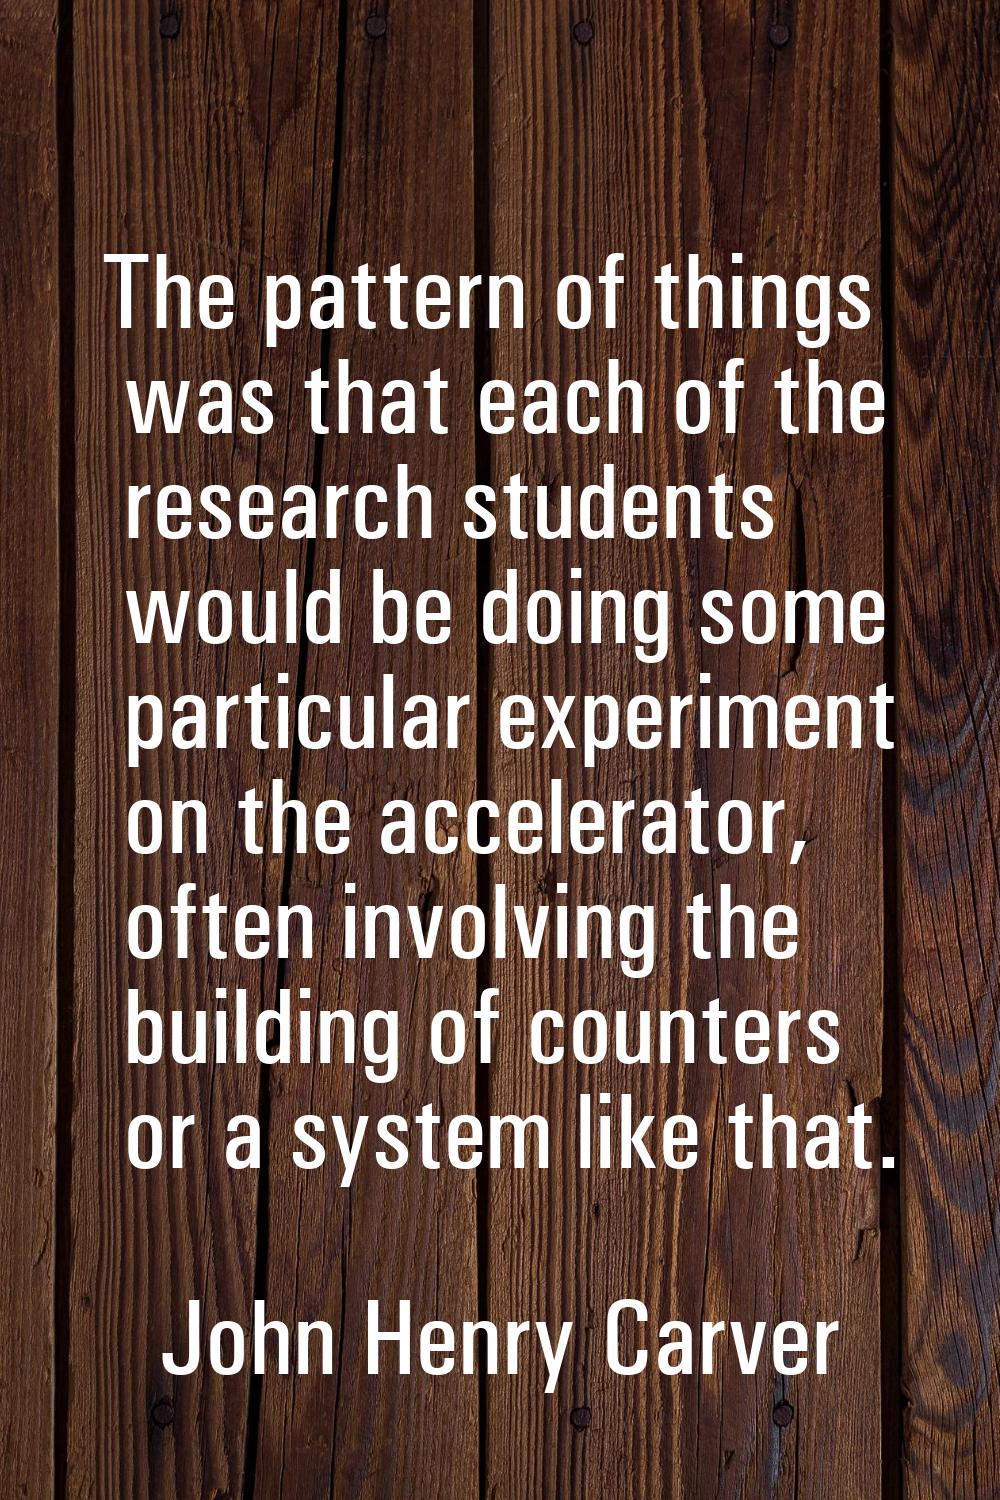 The pattern of things was that each of the research students would be doing some particular experim